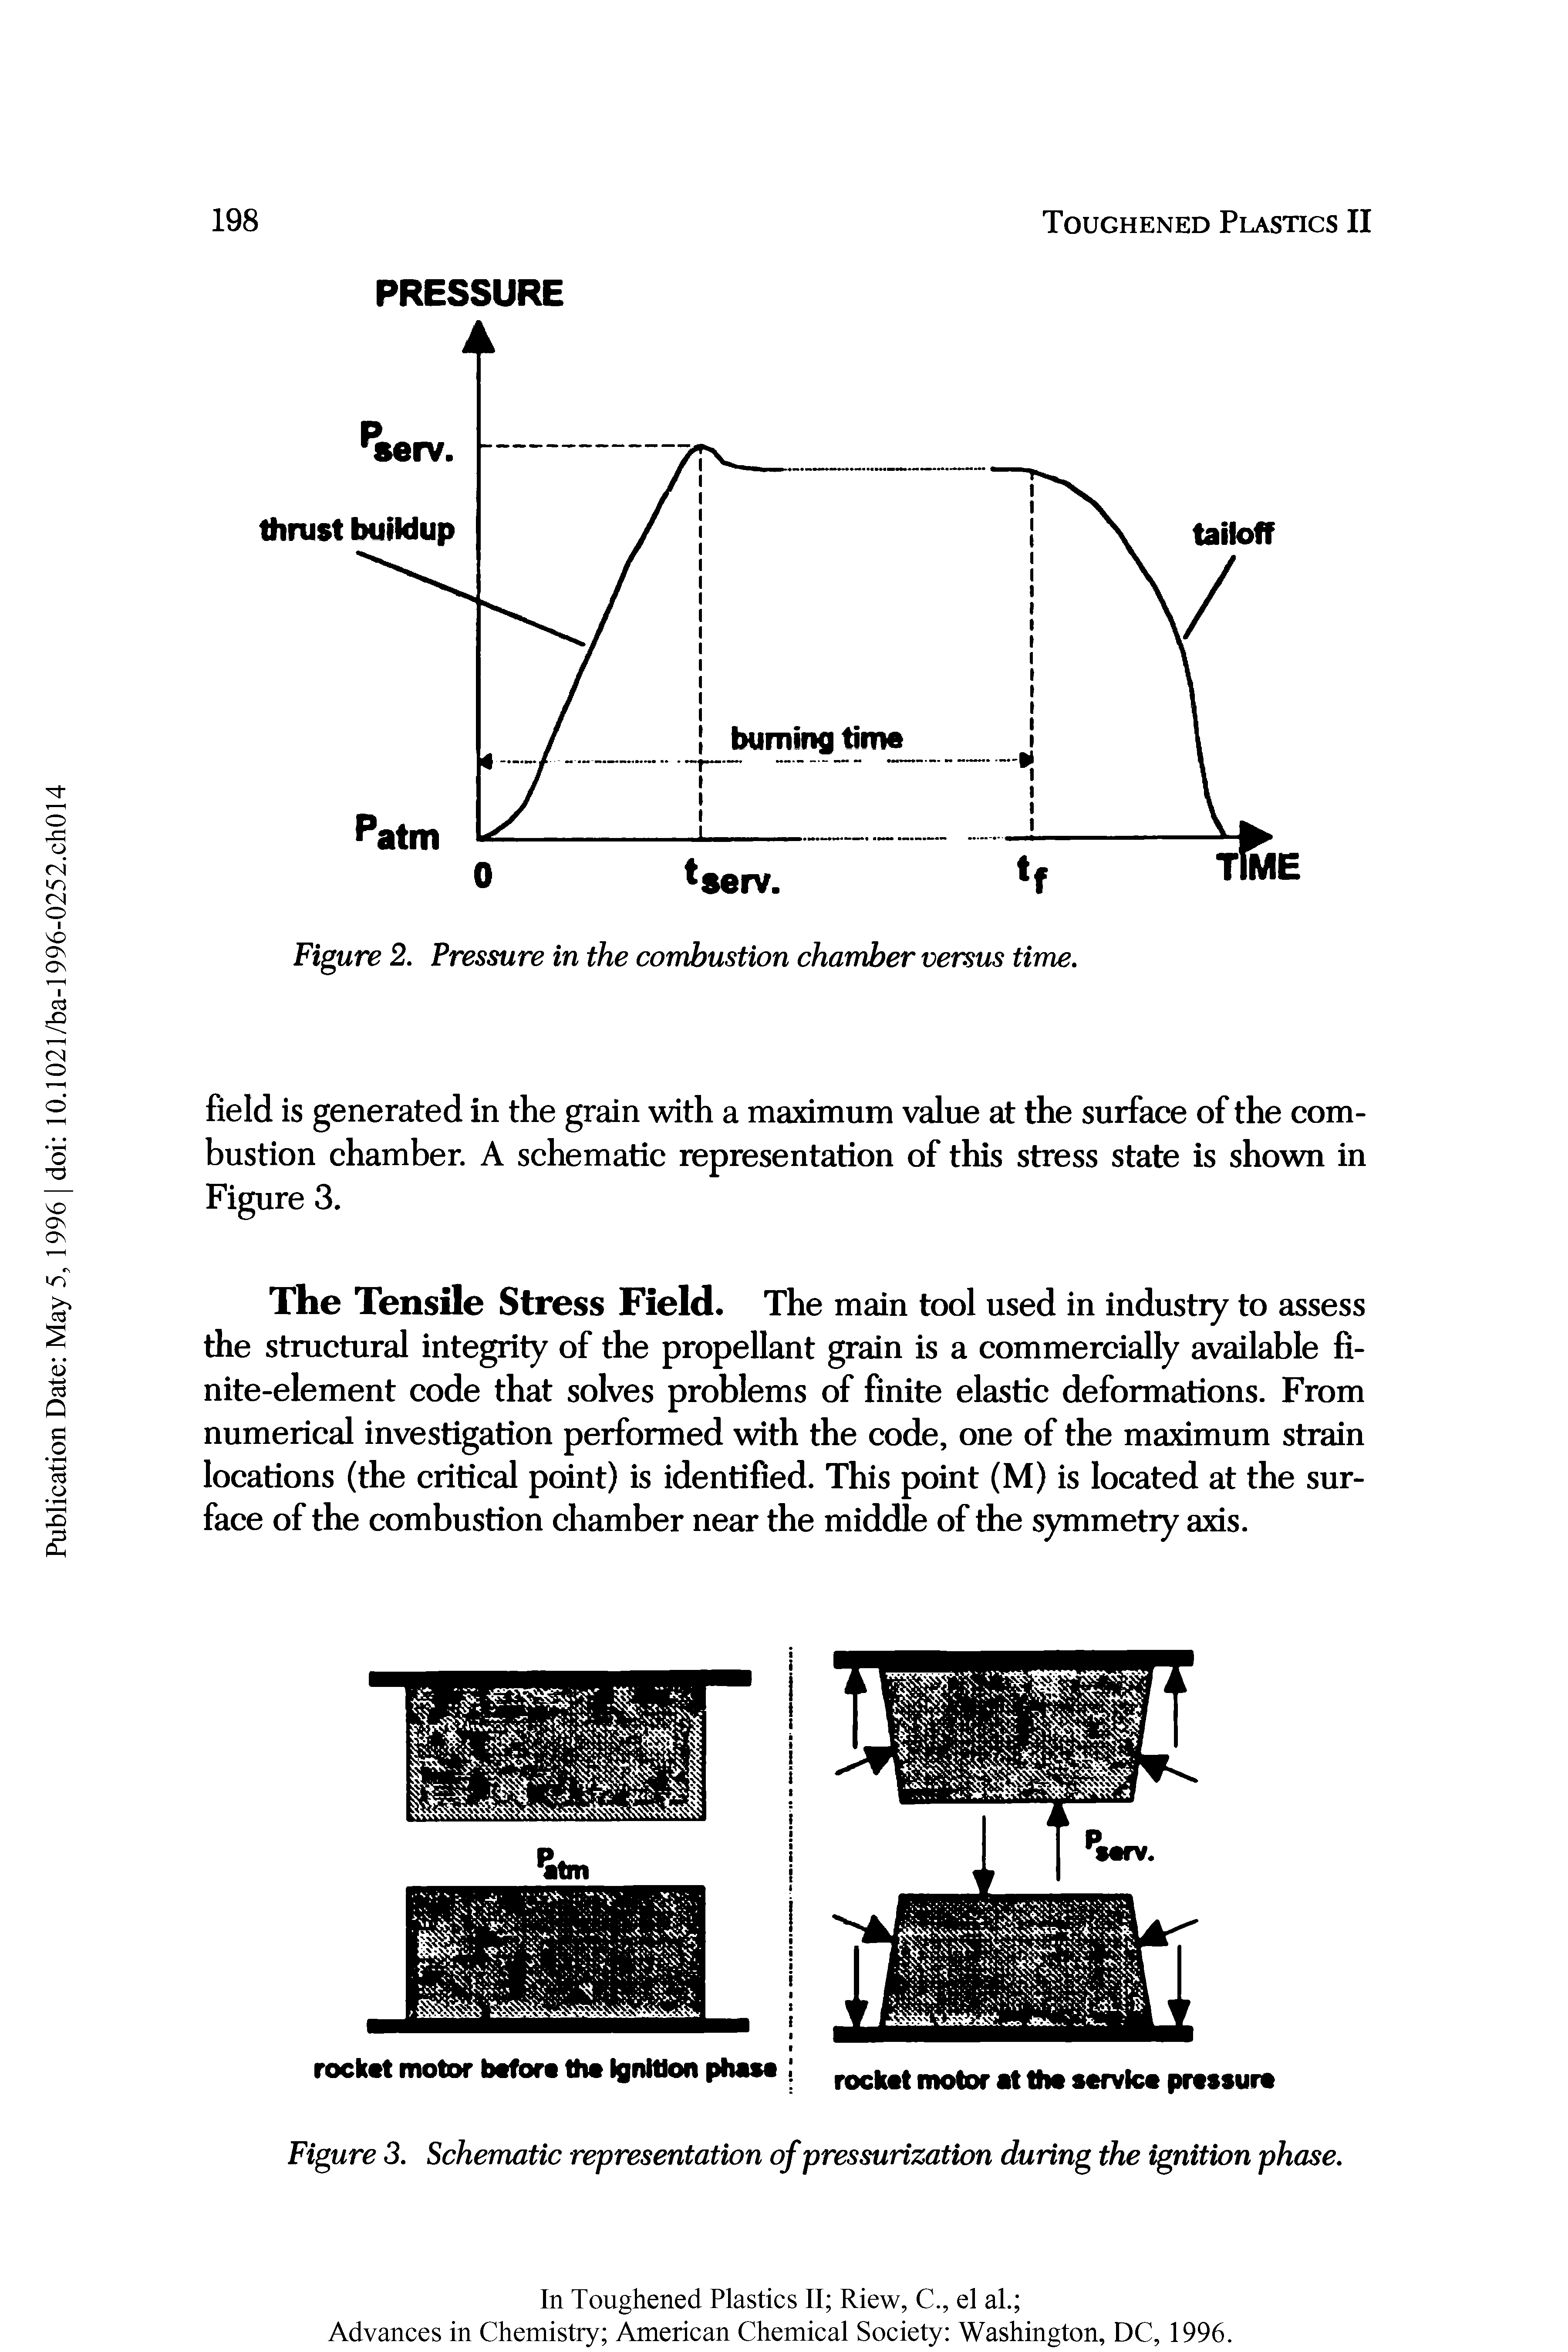 Figure 3. Schematic representation of pressurization during the ignition phase.